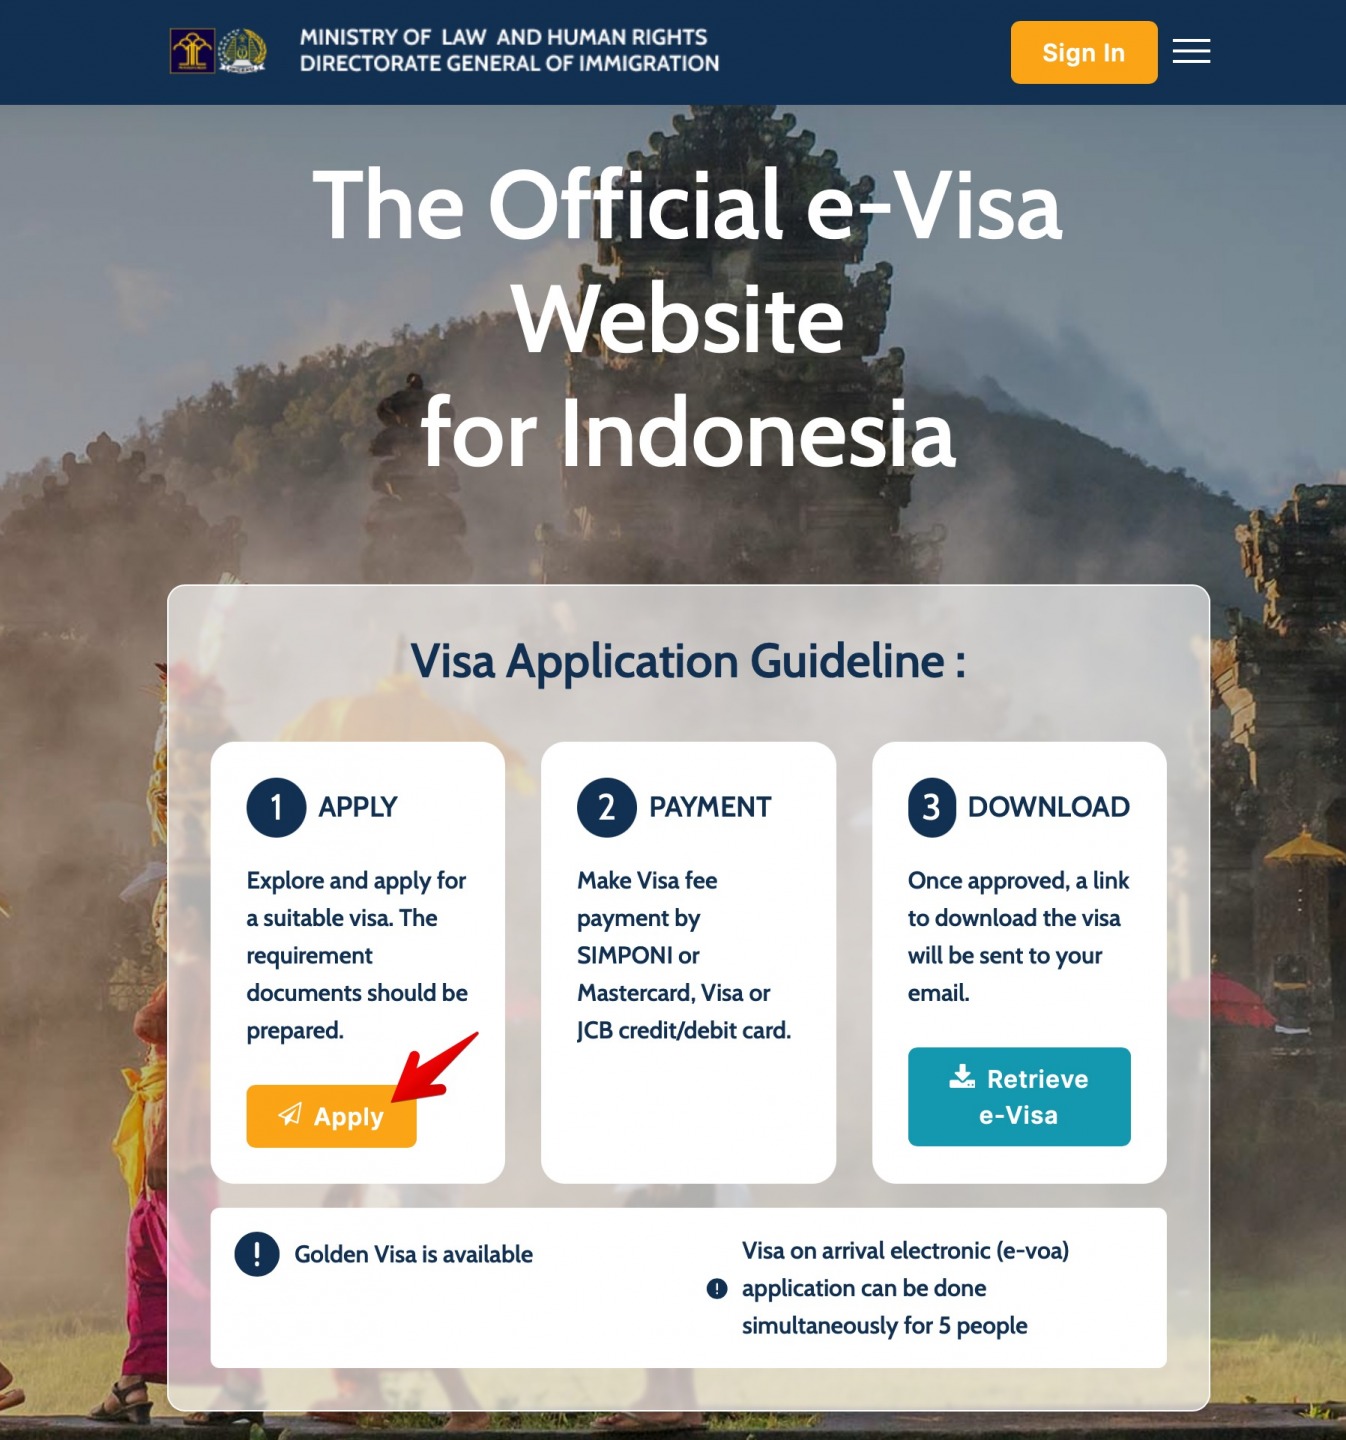 The Official eVisa website for Indonesia